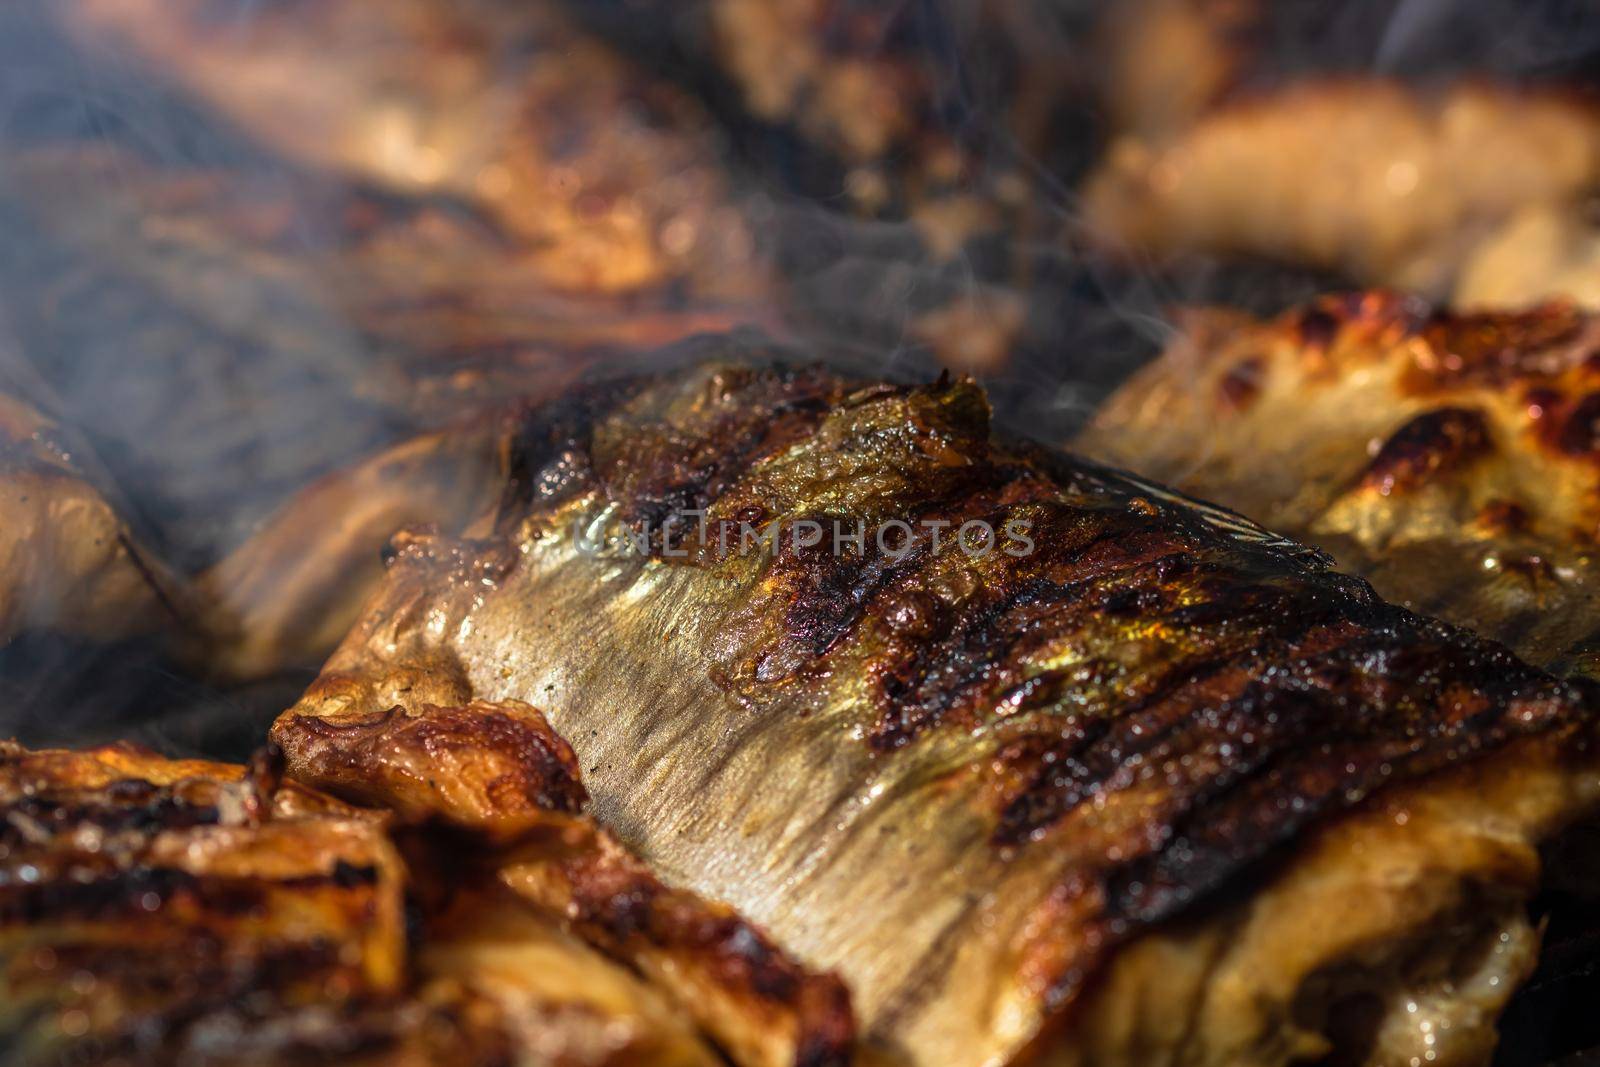 Grilled mackerel fish with smoke on a charcoal barbecue grill.